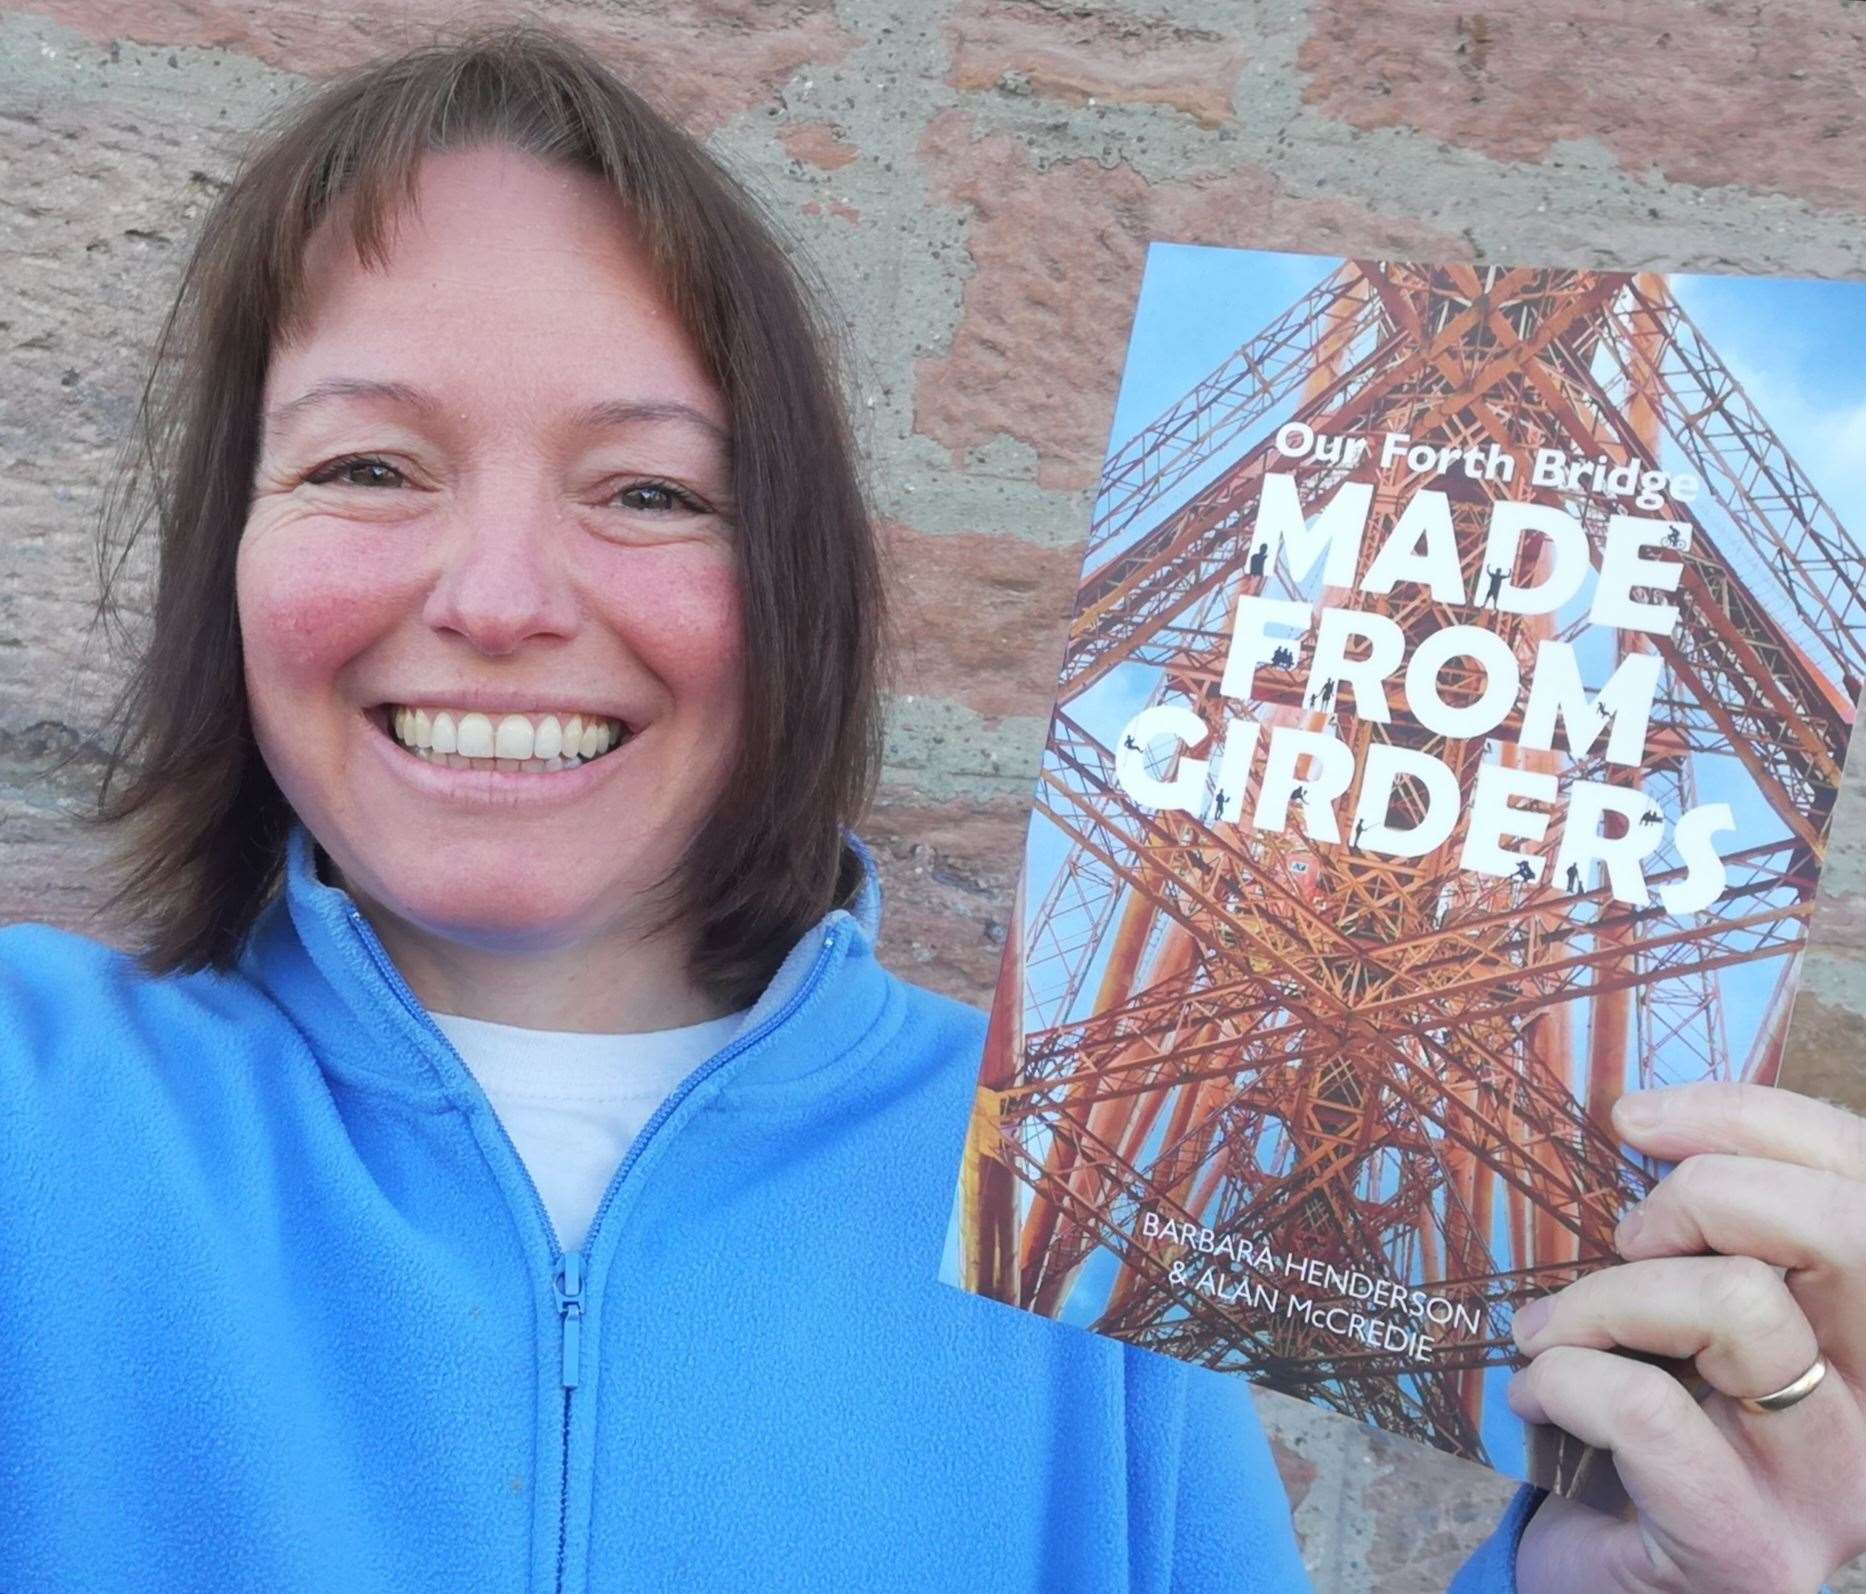 Barbara Henderson's new book Made From Girders.